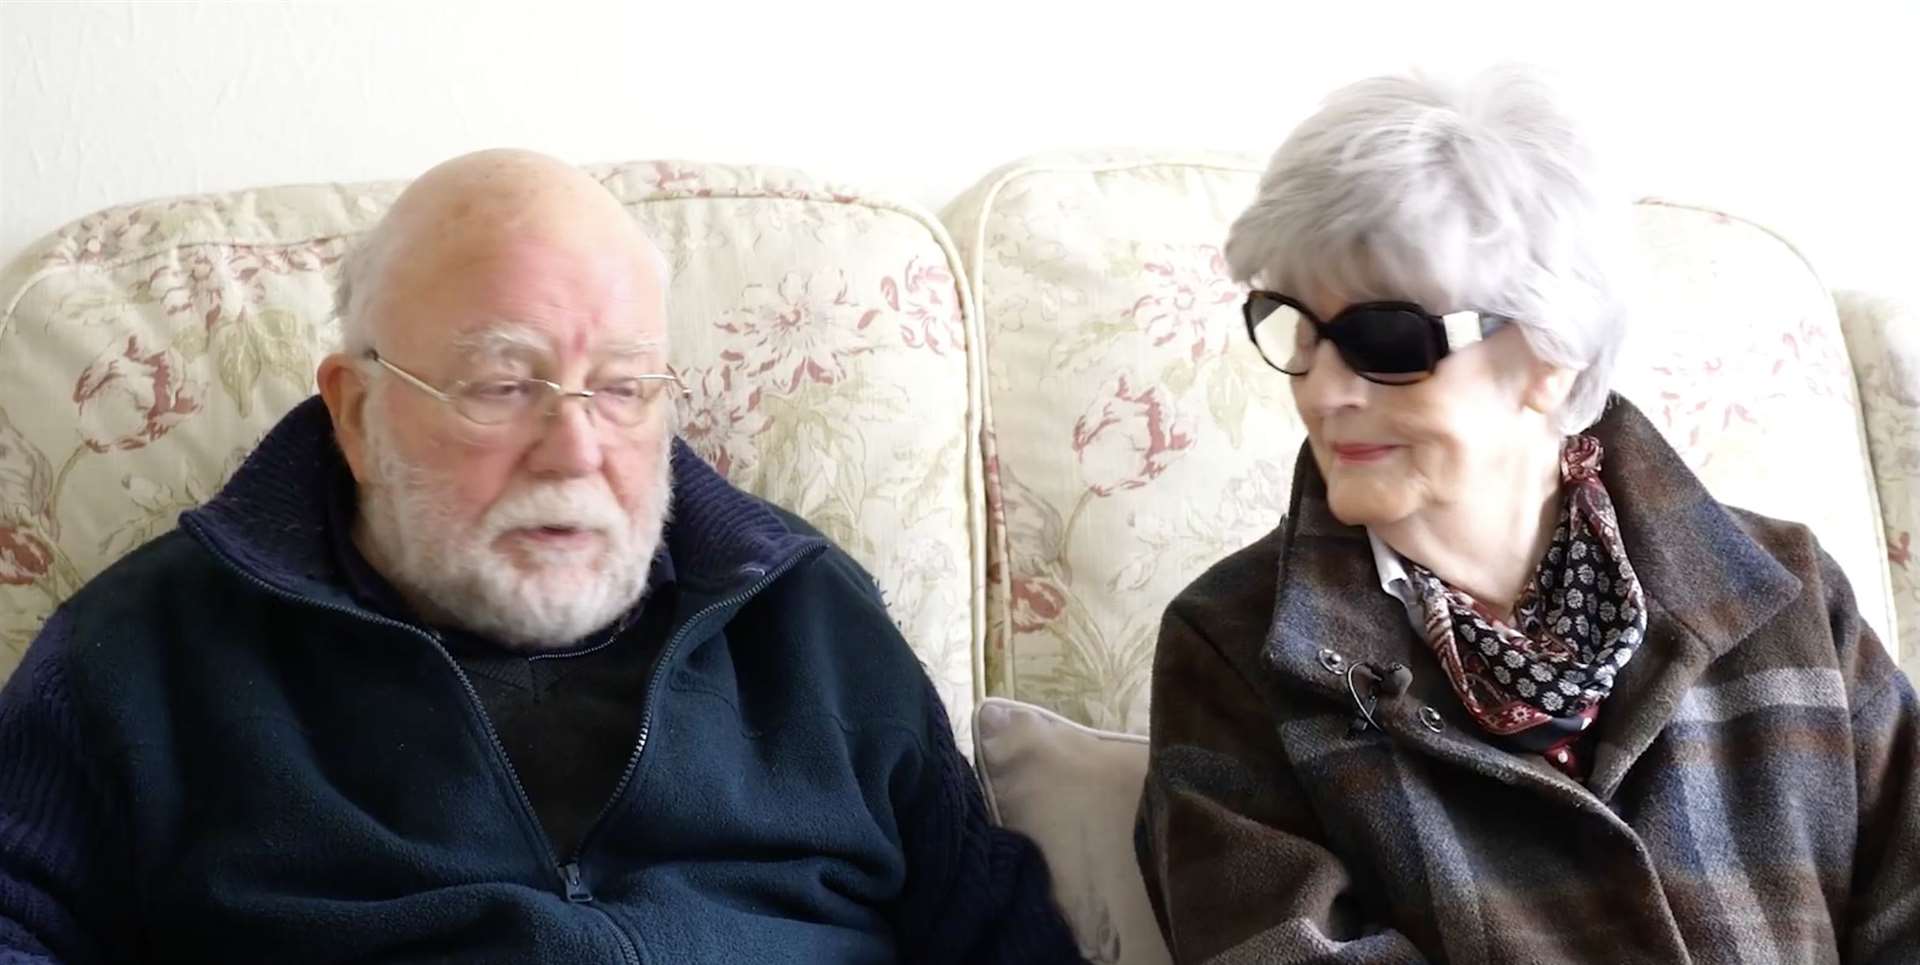 Michael and Marjorie Corden were left devastated by the blaze at their flat in Broadstairs. Picture: KFRS